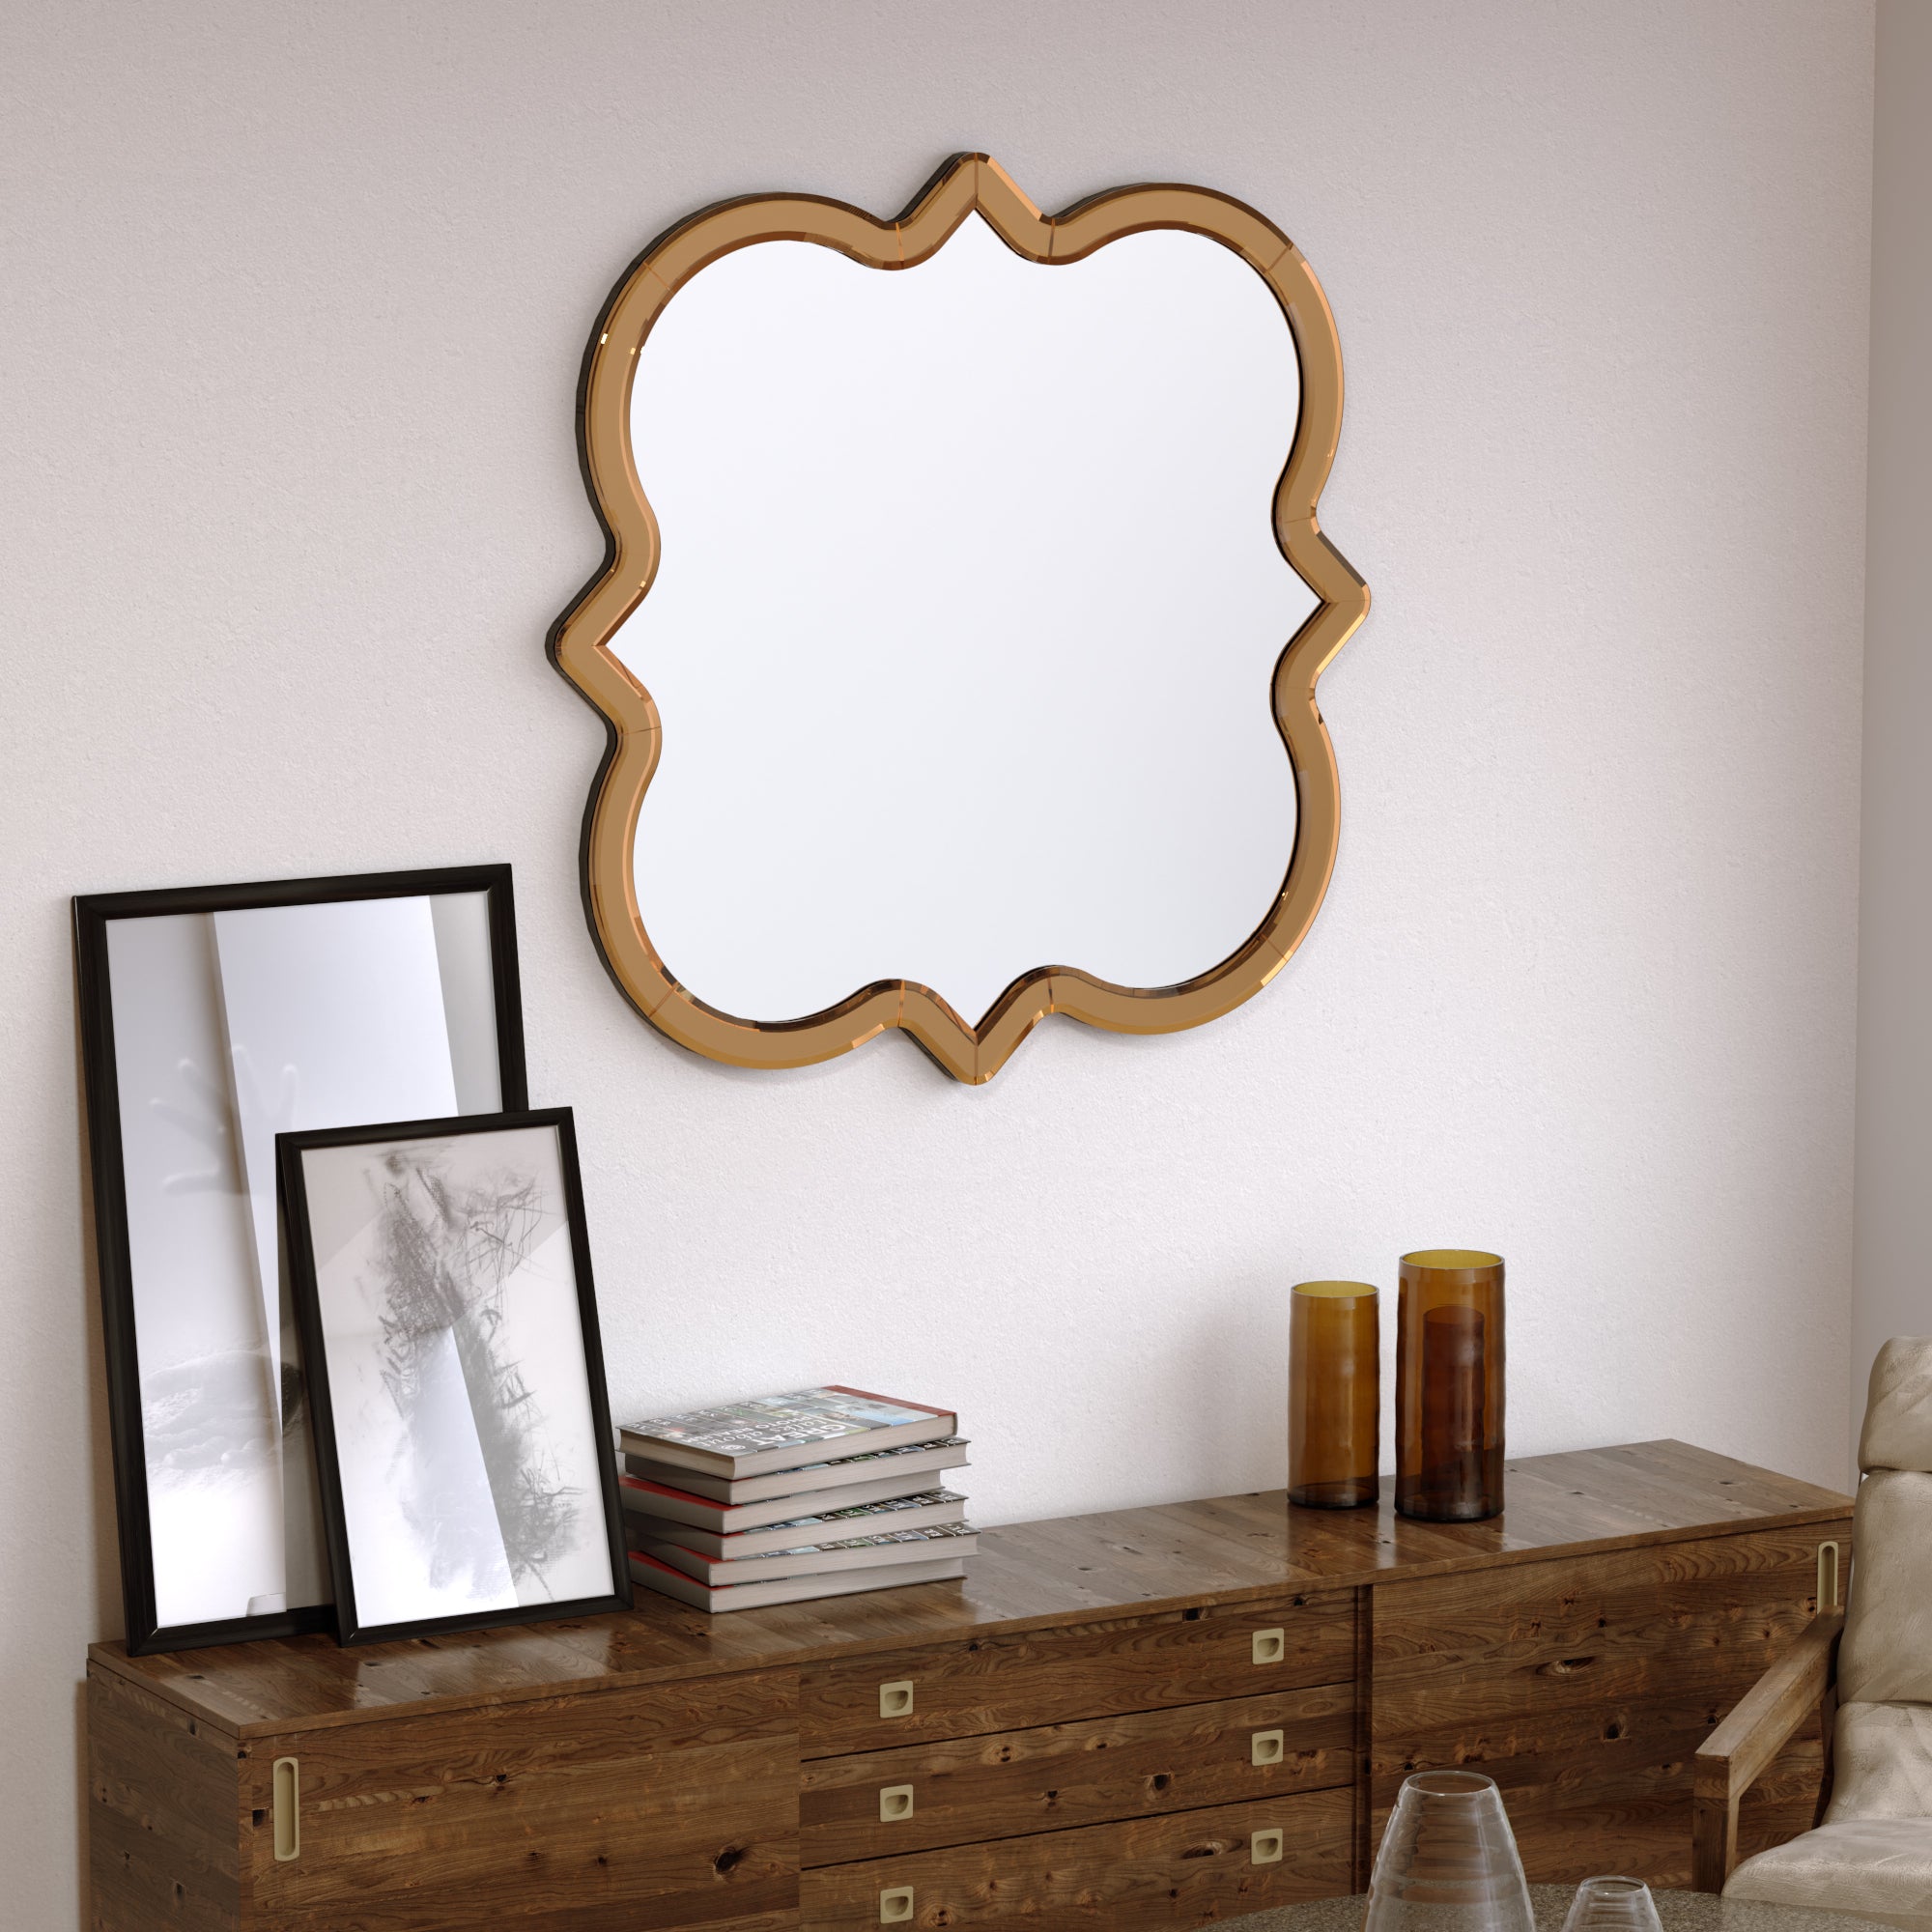 Wall-Mounted Silver Decorative Round Wall Mirror 24x24 inch